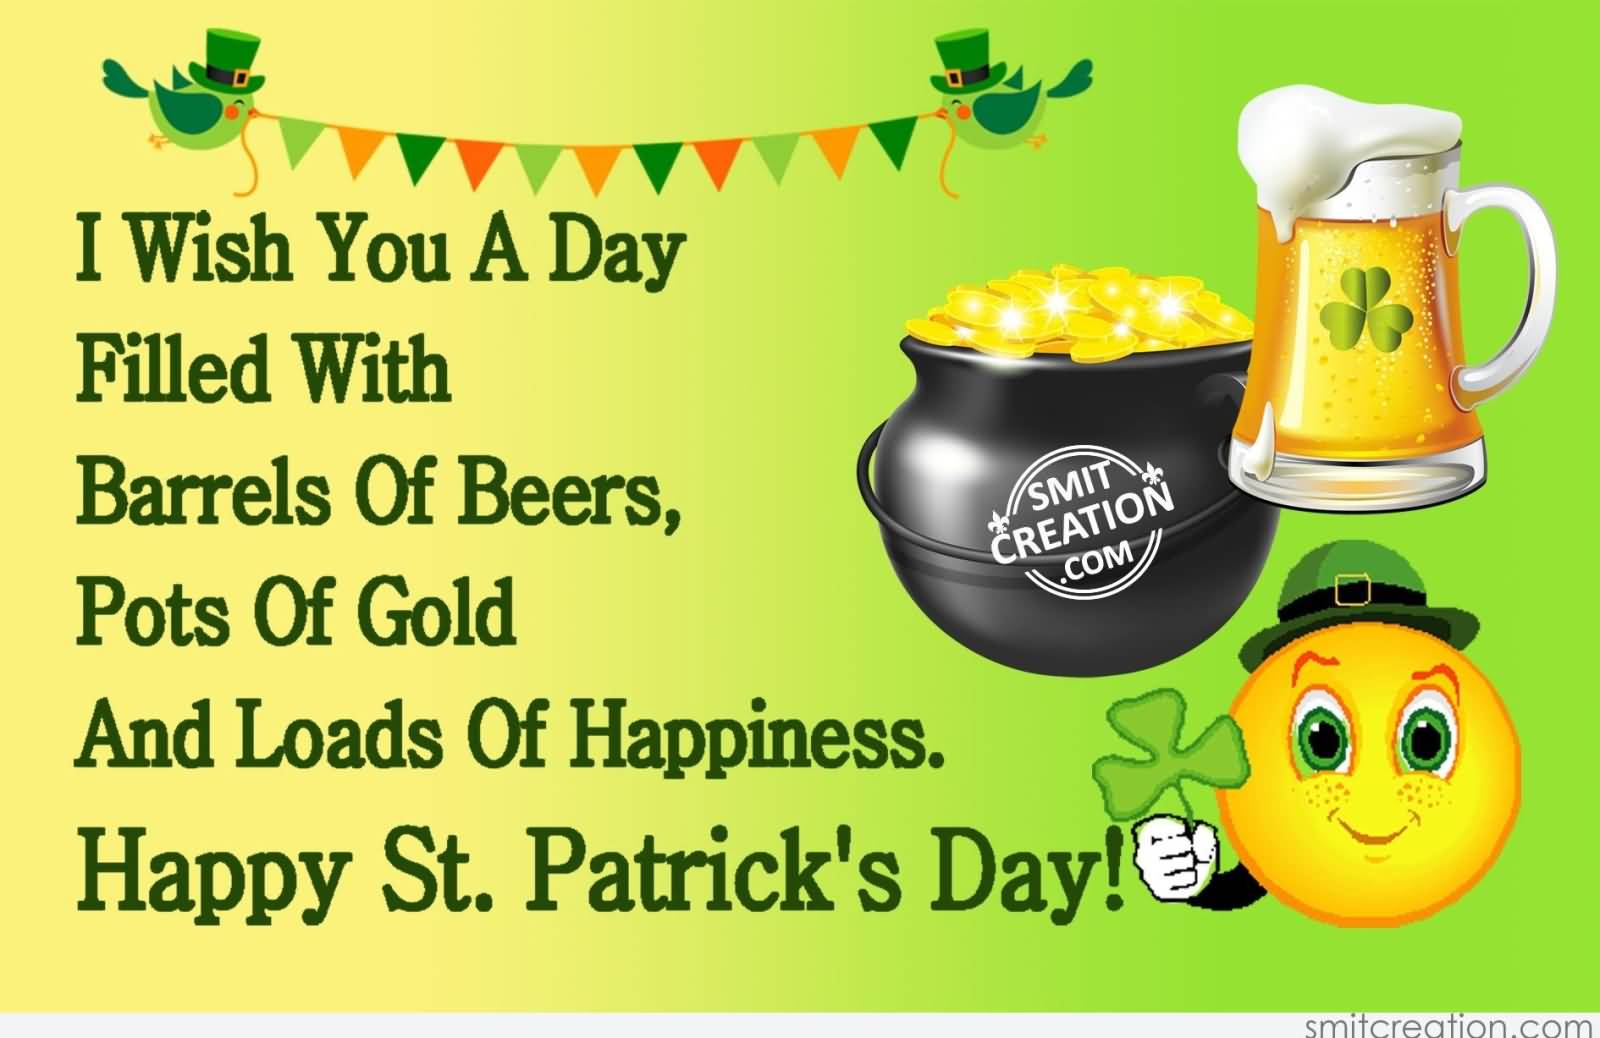 I Wish You A Day Filled With Barrels Of Beers, Pots Of Gold And Loads Of Happiness. Happy Saint Patrick's Day